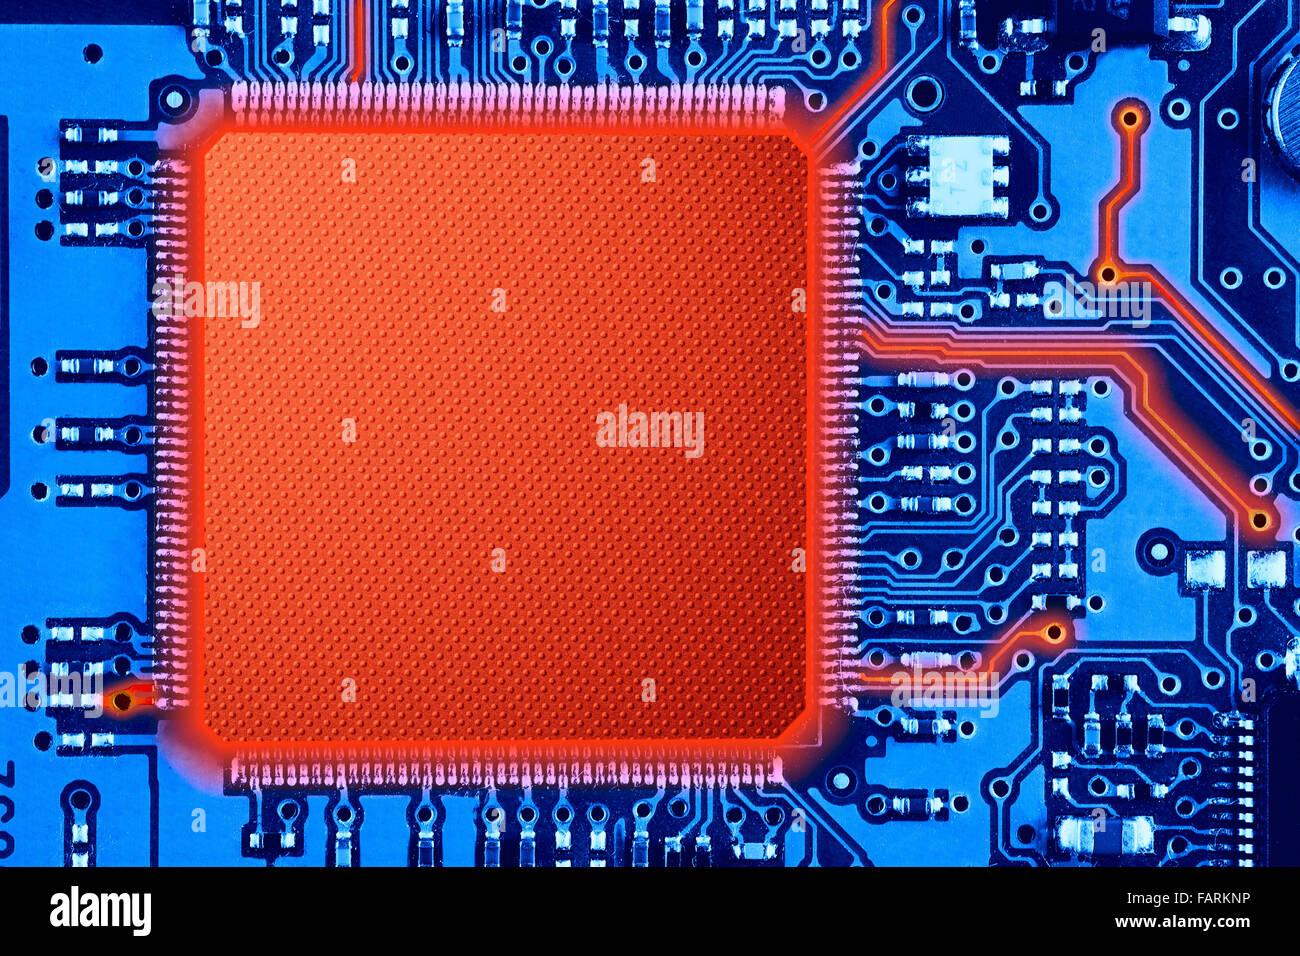 blue and red printed circuit board or computer technology background Stock Photo